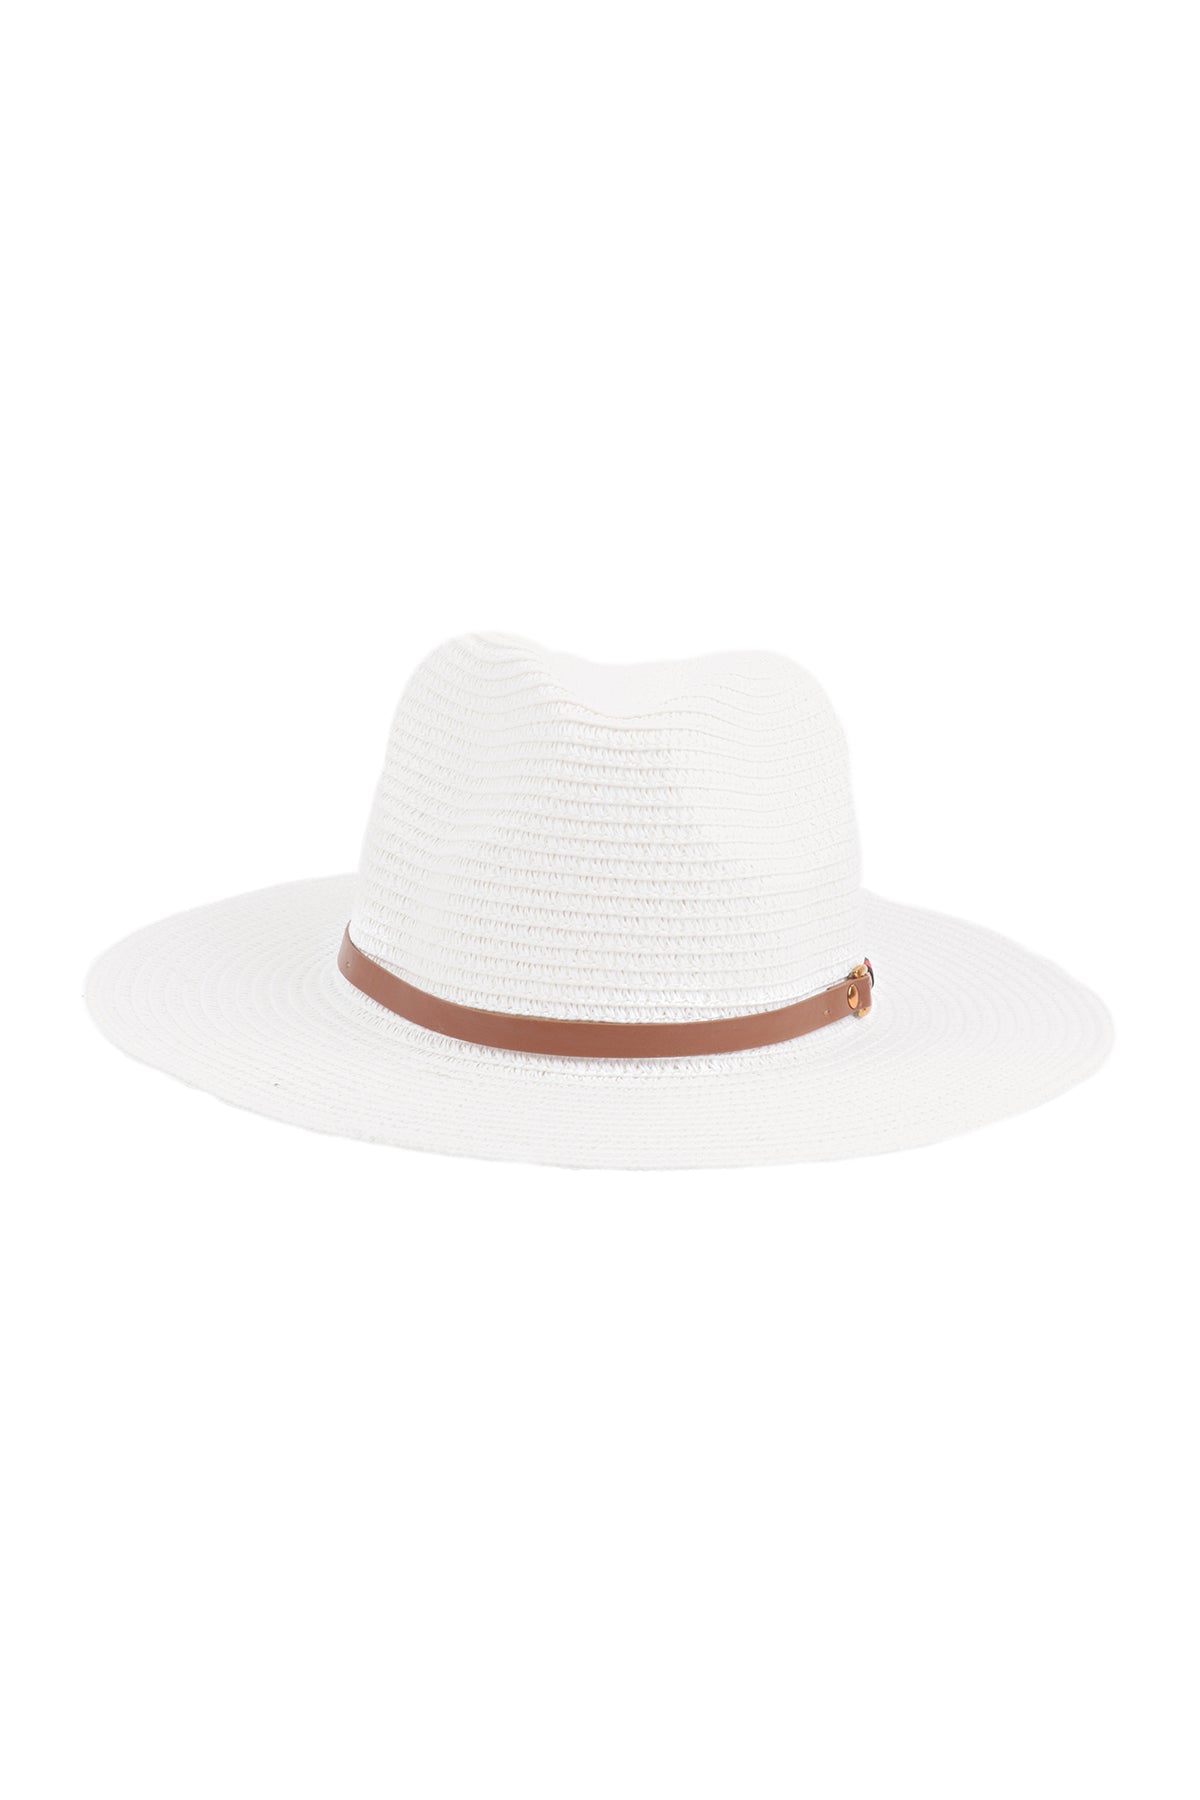 WOMEN'S SUMMER STRAW HAT WITH LEATHER STRAP